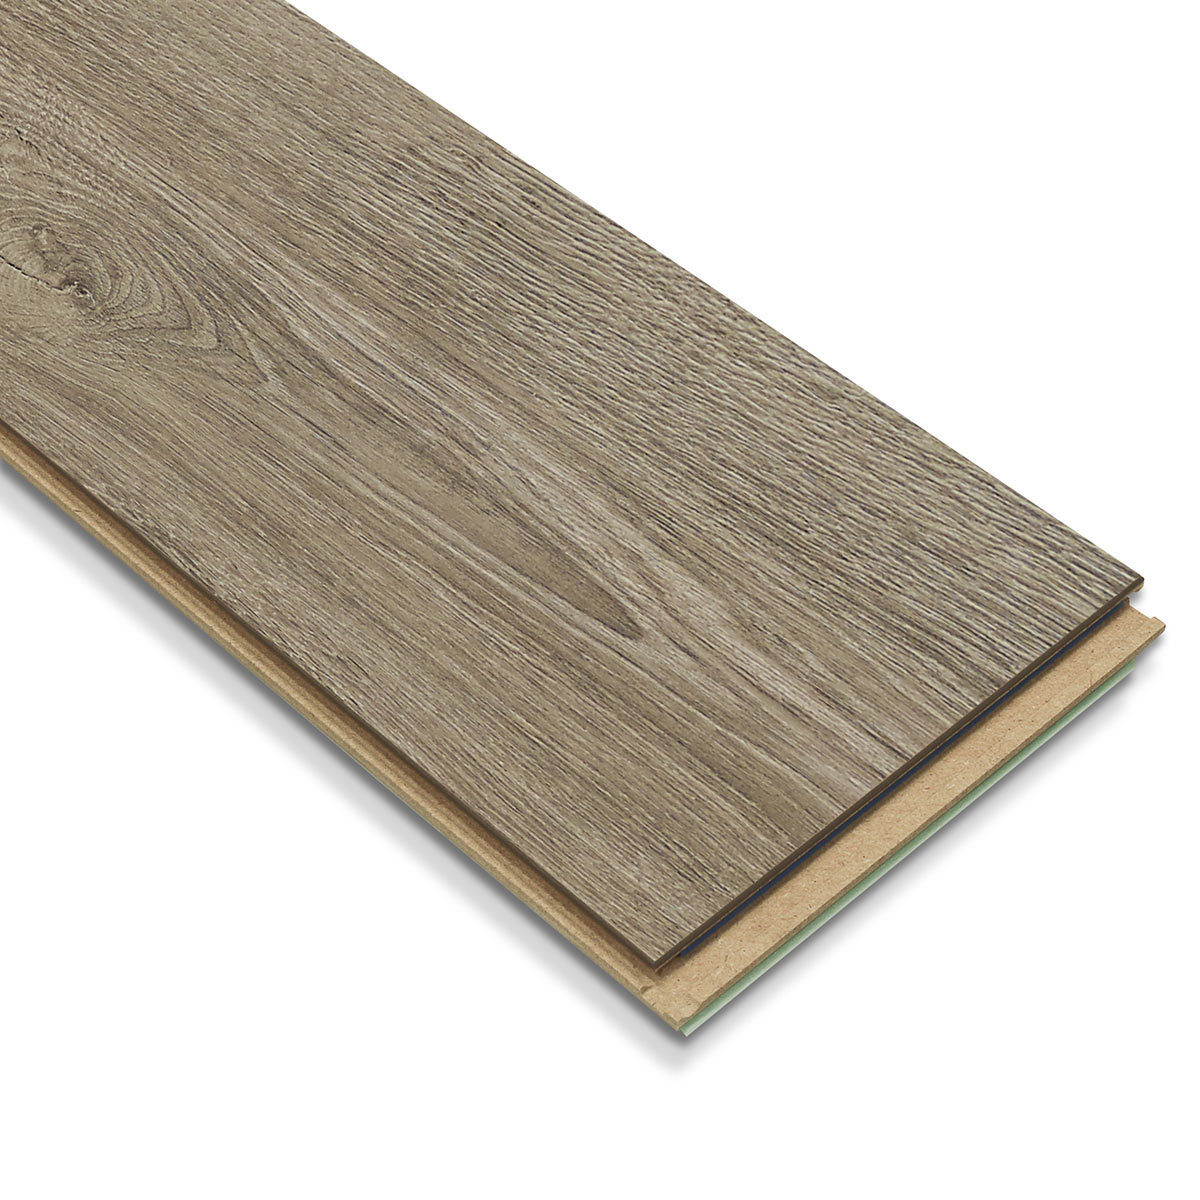 Golden Select Providence (Grey) AC4 Laminate Flooring with Foam Underlay - 1.16 m² Per Pack